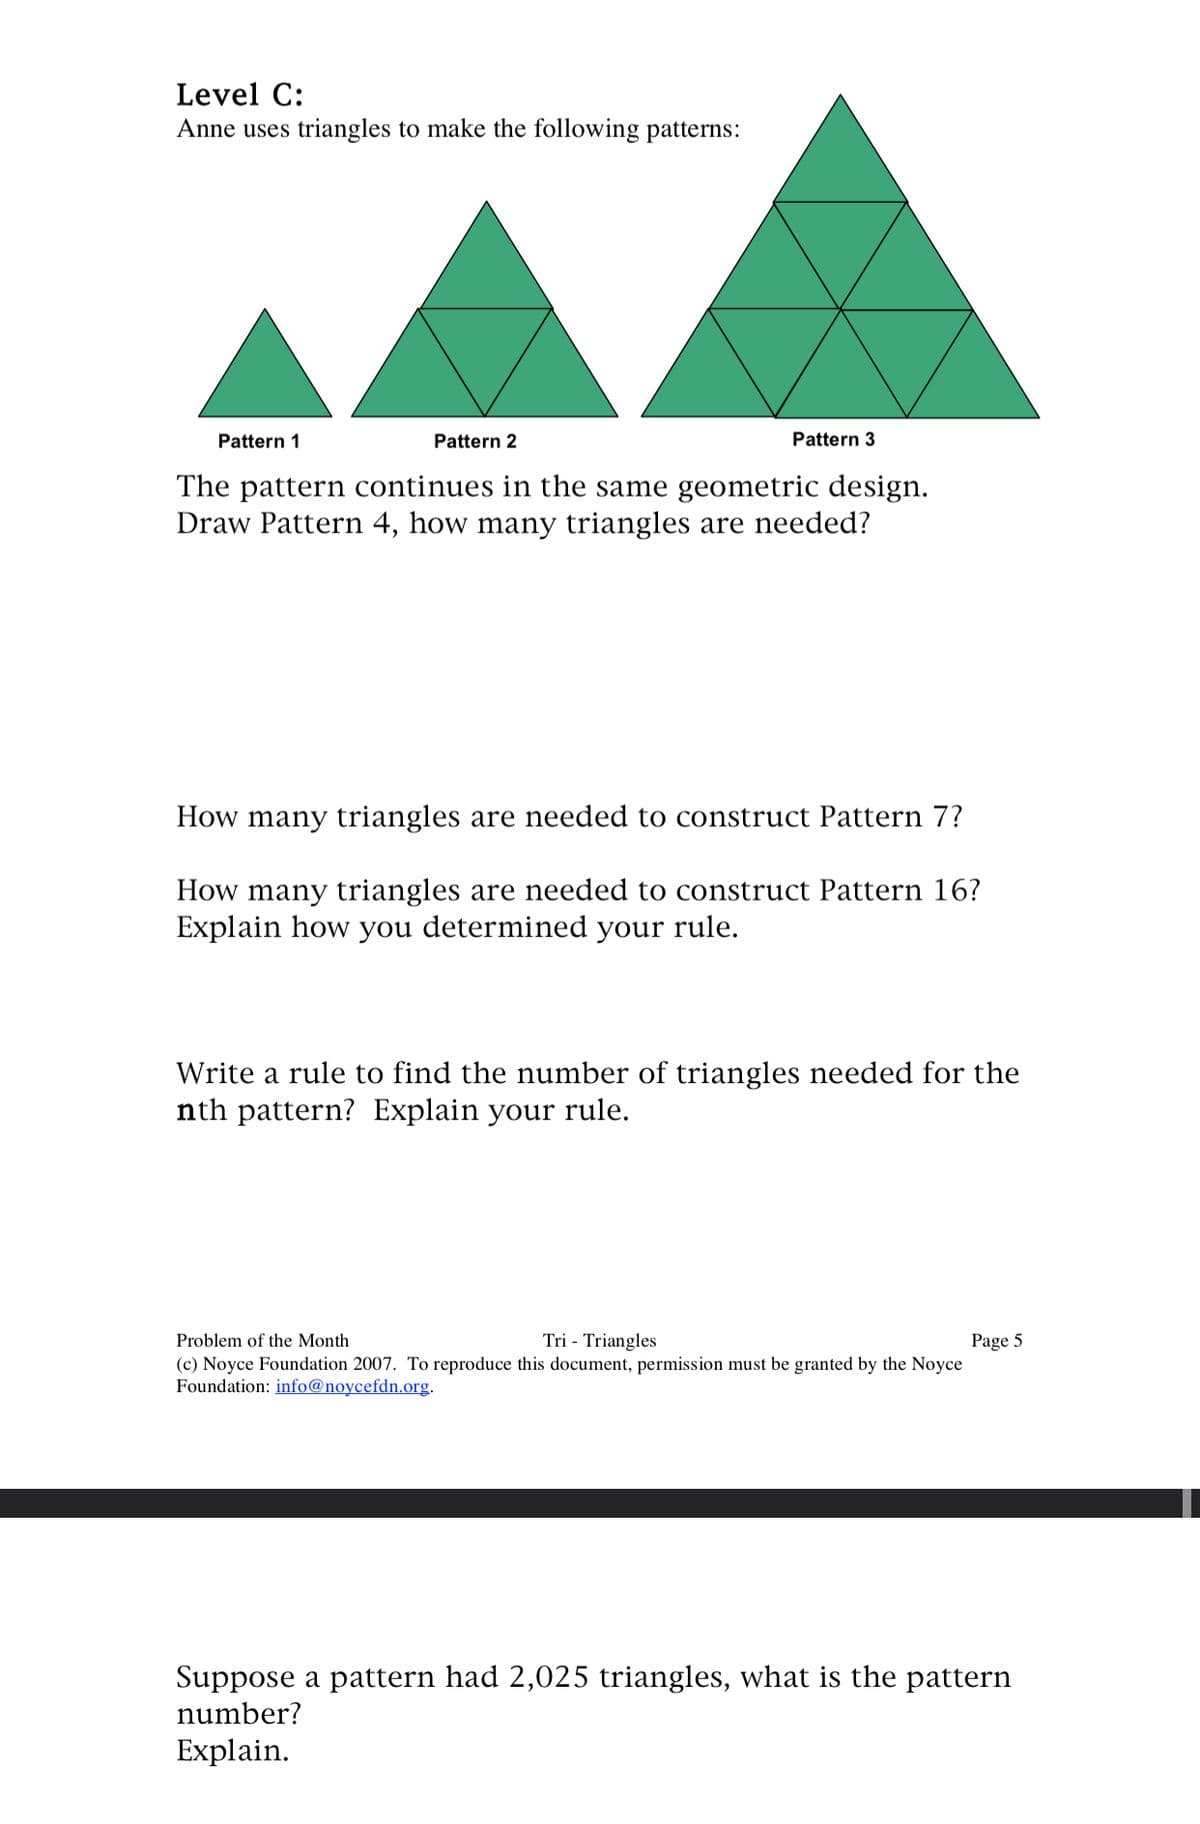 Level C:
Anne uses triangles to make the following patterns:
Pattern 1
Pattern 2
Pattern 3
The pattern continues in the same geometric design.
Draw Pattern 4, how many triangles are needed?
How many triangles are needed to construct Pattern 7?
How many triangles are needed to construct Pattern 16?
Explain how you determined your rule.
Write a rule to find the number of triangles needed for the
nth pattern? Explain your rule.
Problem of the Month
Tri - Triangles
(c) Noyce Foundation 2007. To reproduce this document, permission must be granted by the Noyce
Foundation: info@noycefdn.org.
Page 5
Suppose a pattern had 2,025 triangles, what is the pattern
number?
Explain.